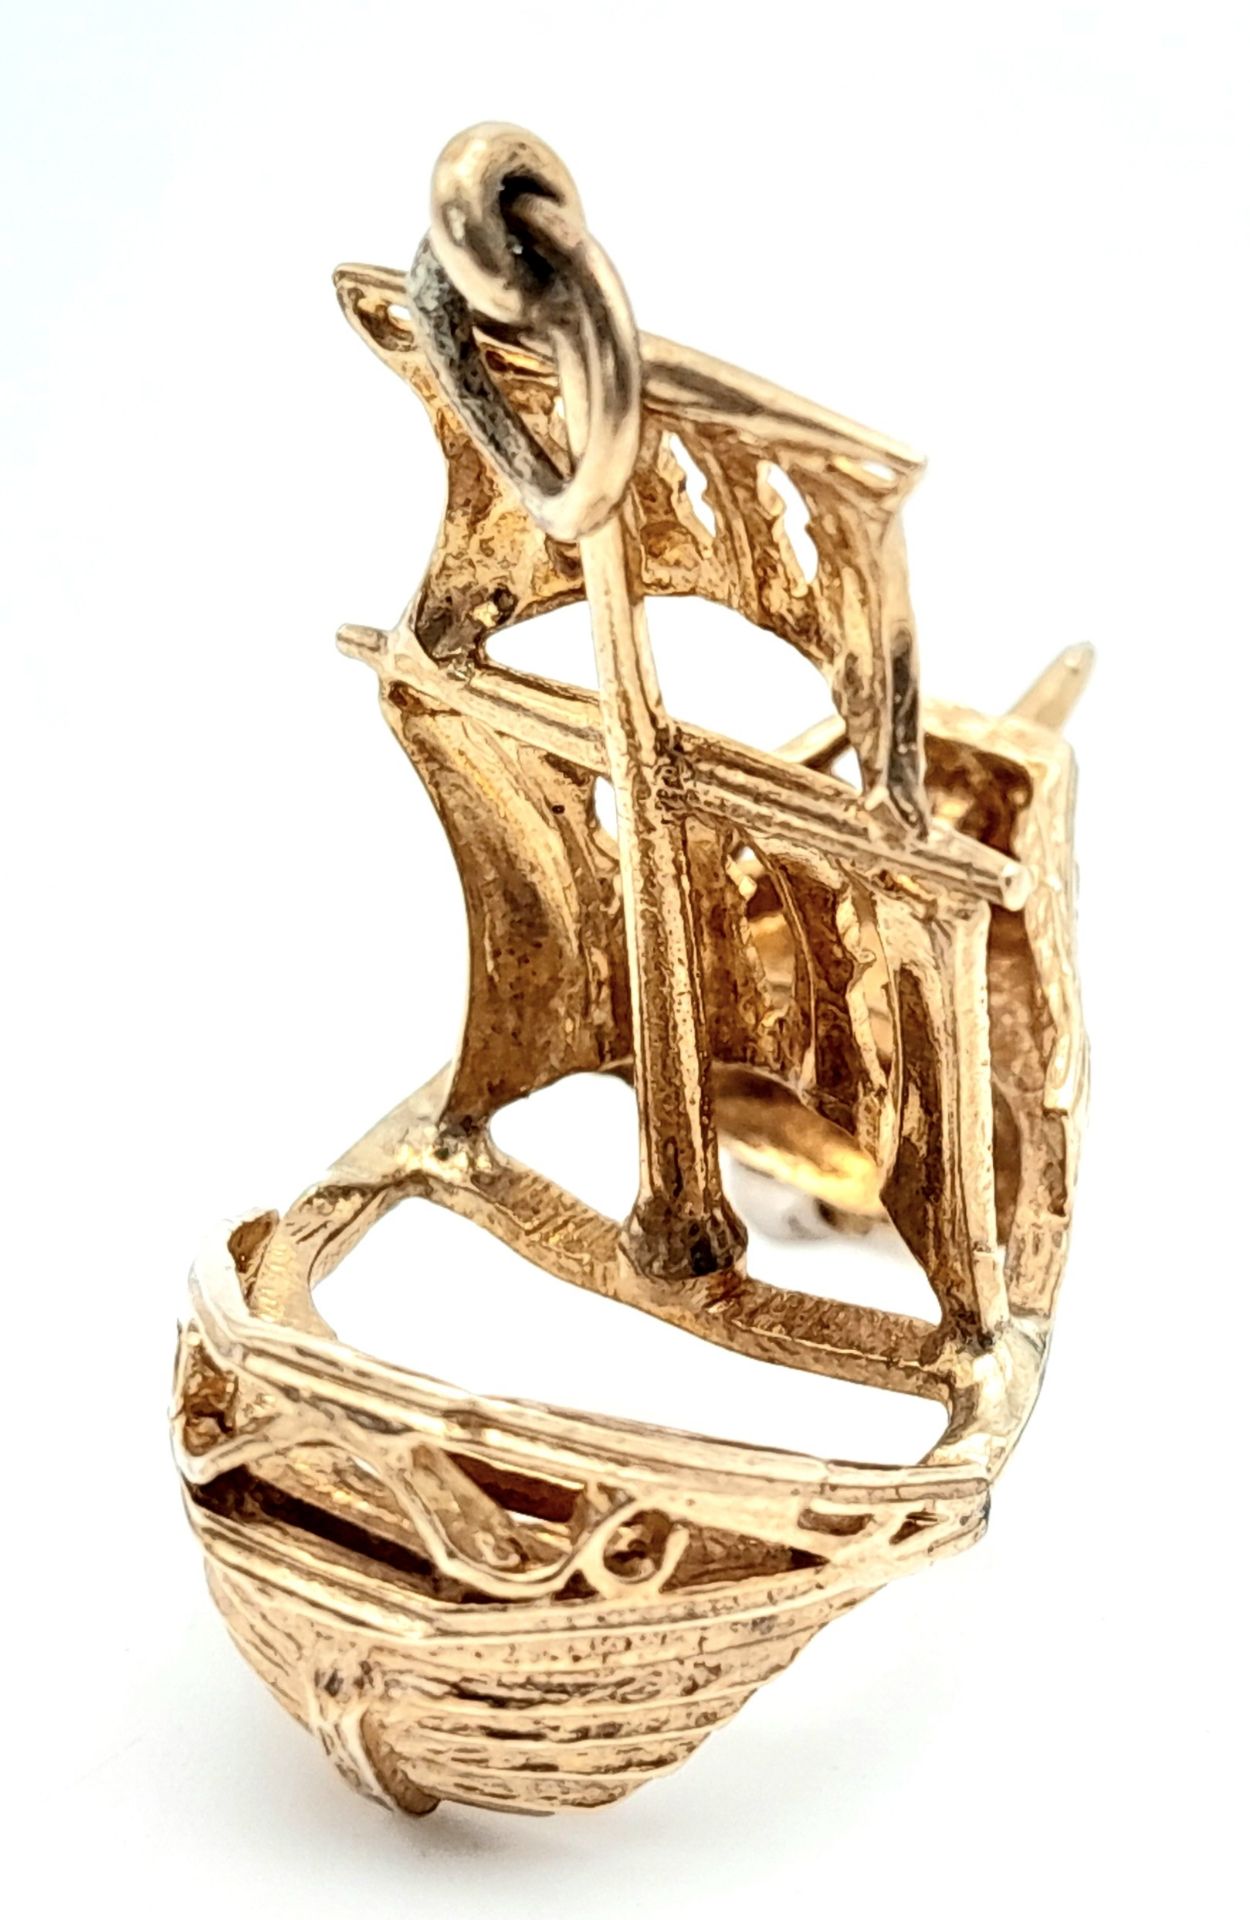 A 9K YELLOW GOLD PIRATE SHIP CHARM. 3.4cm length, 5.2g weight. Ref: SC 8138 - Image 2 of 5